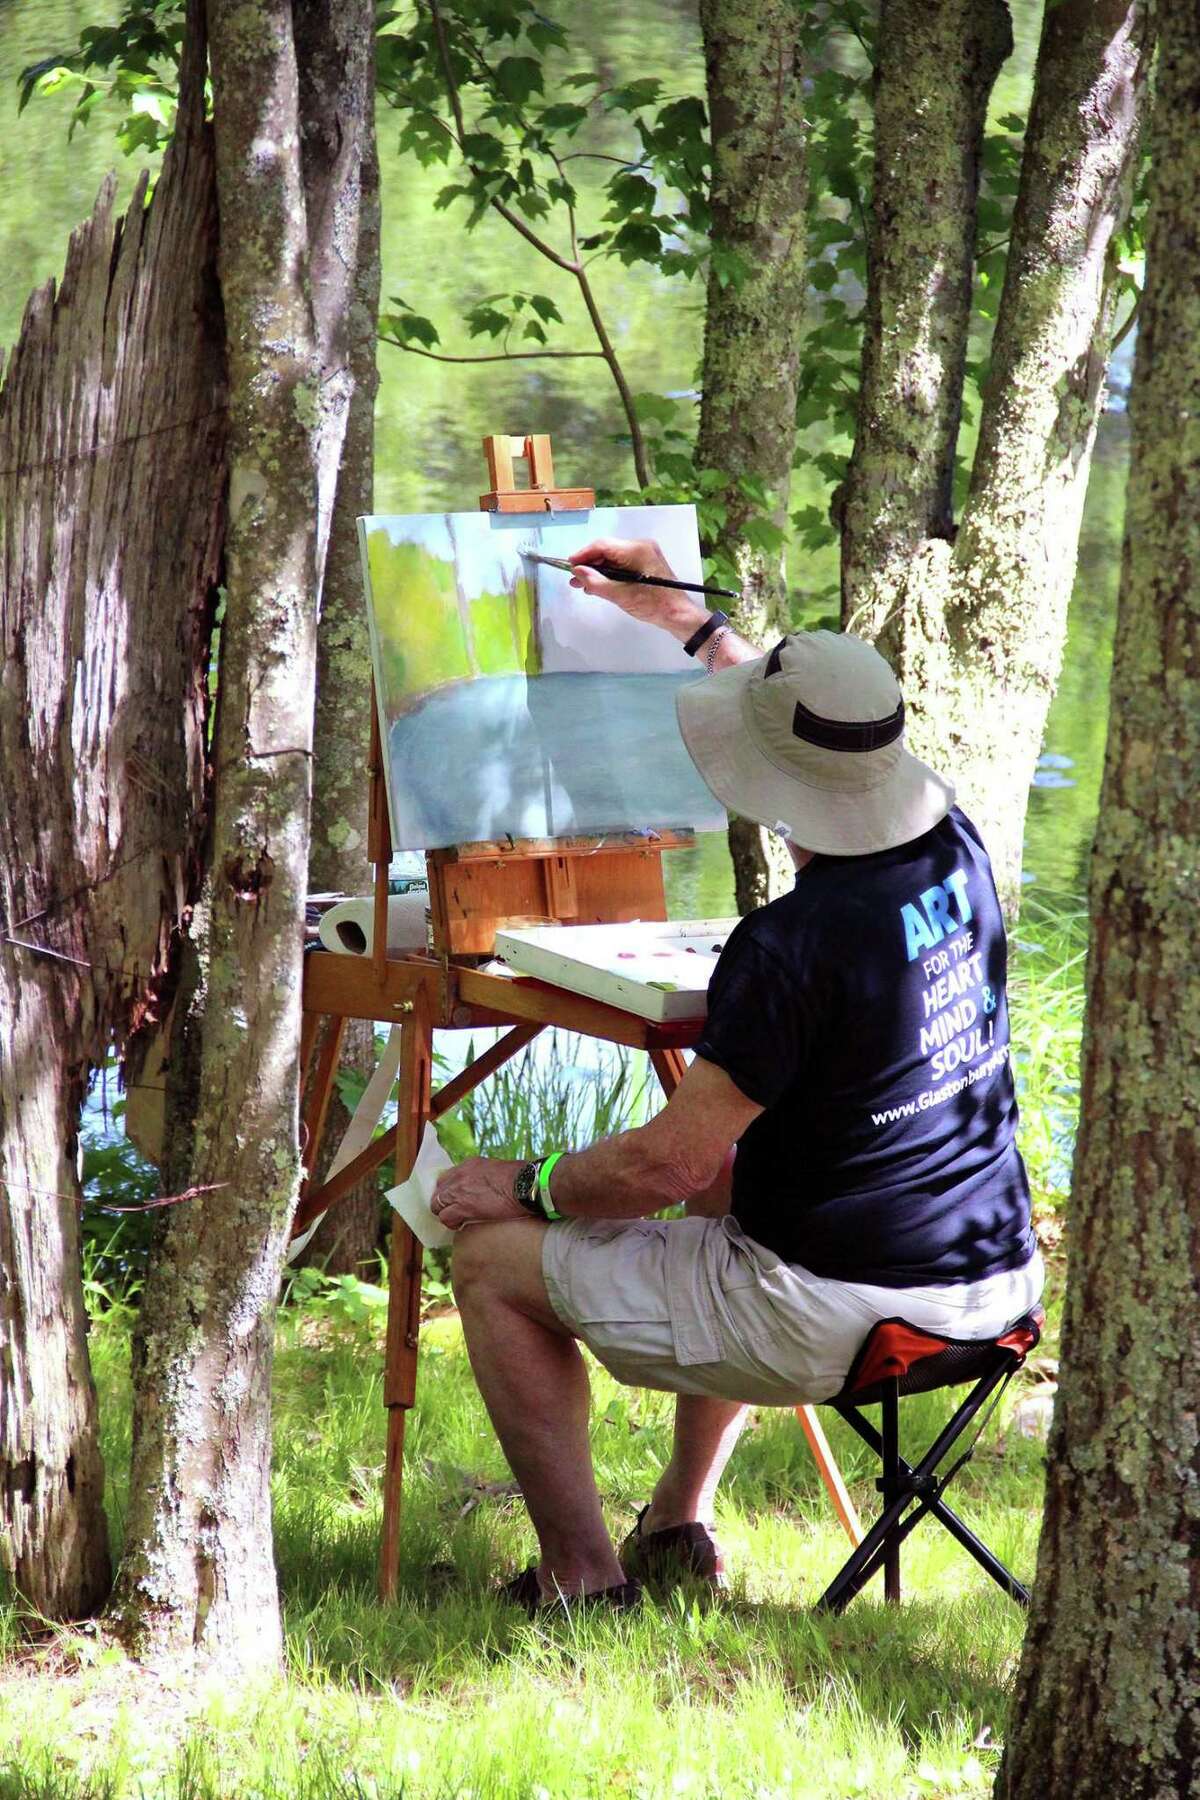 YOU PARK AT I-PARK: Arts collective I-Park in East Haddam (near Devil's Hopyard) will hold its Open Trails + Plein Air Paint-Out for artists, families and nature lovers on Saturday, Sept. 12, from 2-6 p.m. There will also be a new children’s “creation station” available so that artists of all ages can get involved. The entire program is outside with plenty of physical distancing space. RSVP in advance at Eventbrite.com. Rain date is Sept. 13